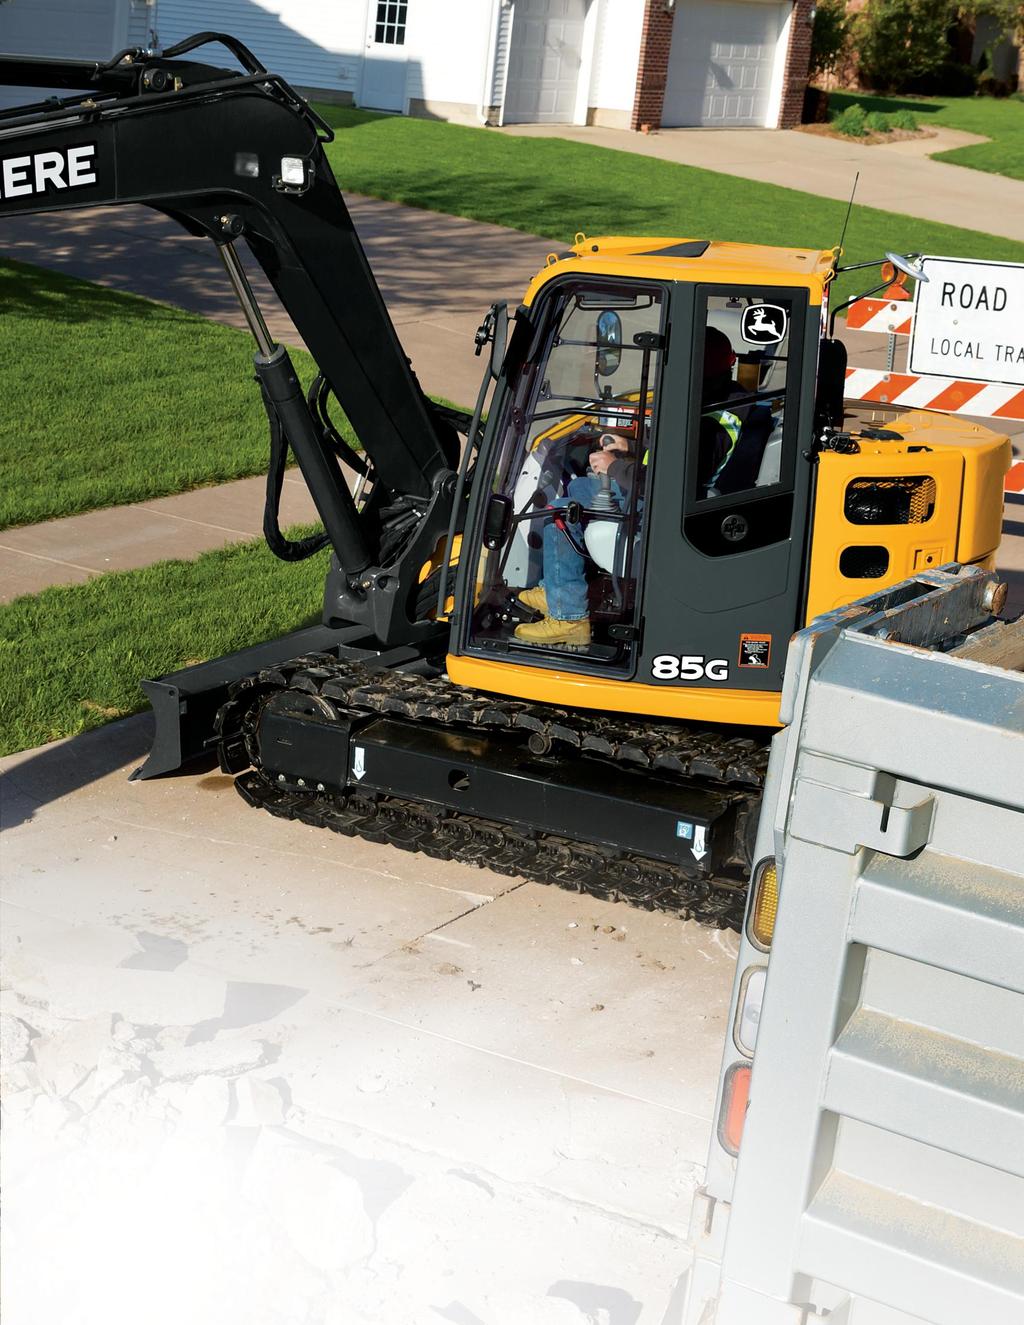 The EPA FT4/EU Stage IV technology in these excavators is simple, fuel efɵcient, fully integrated, and fully supported.